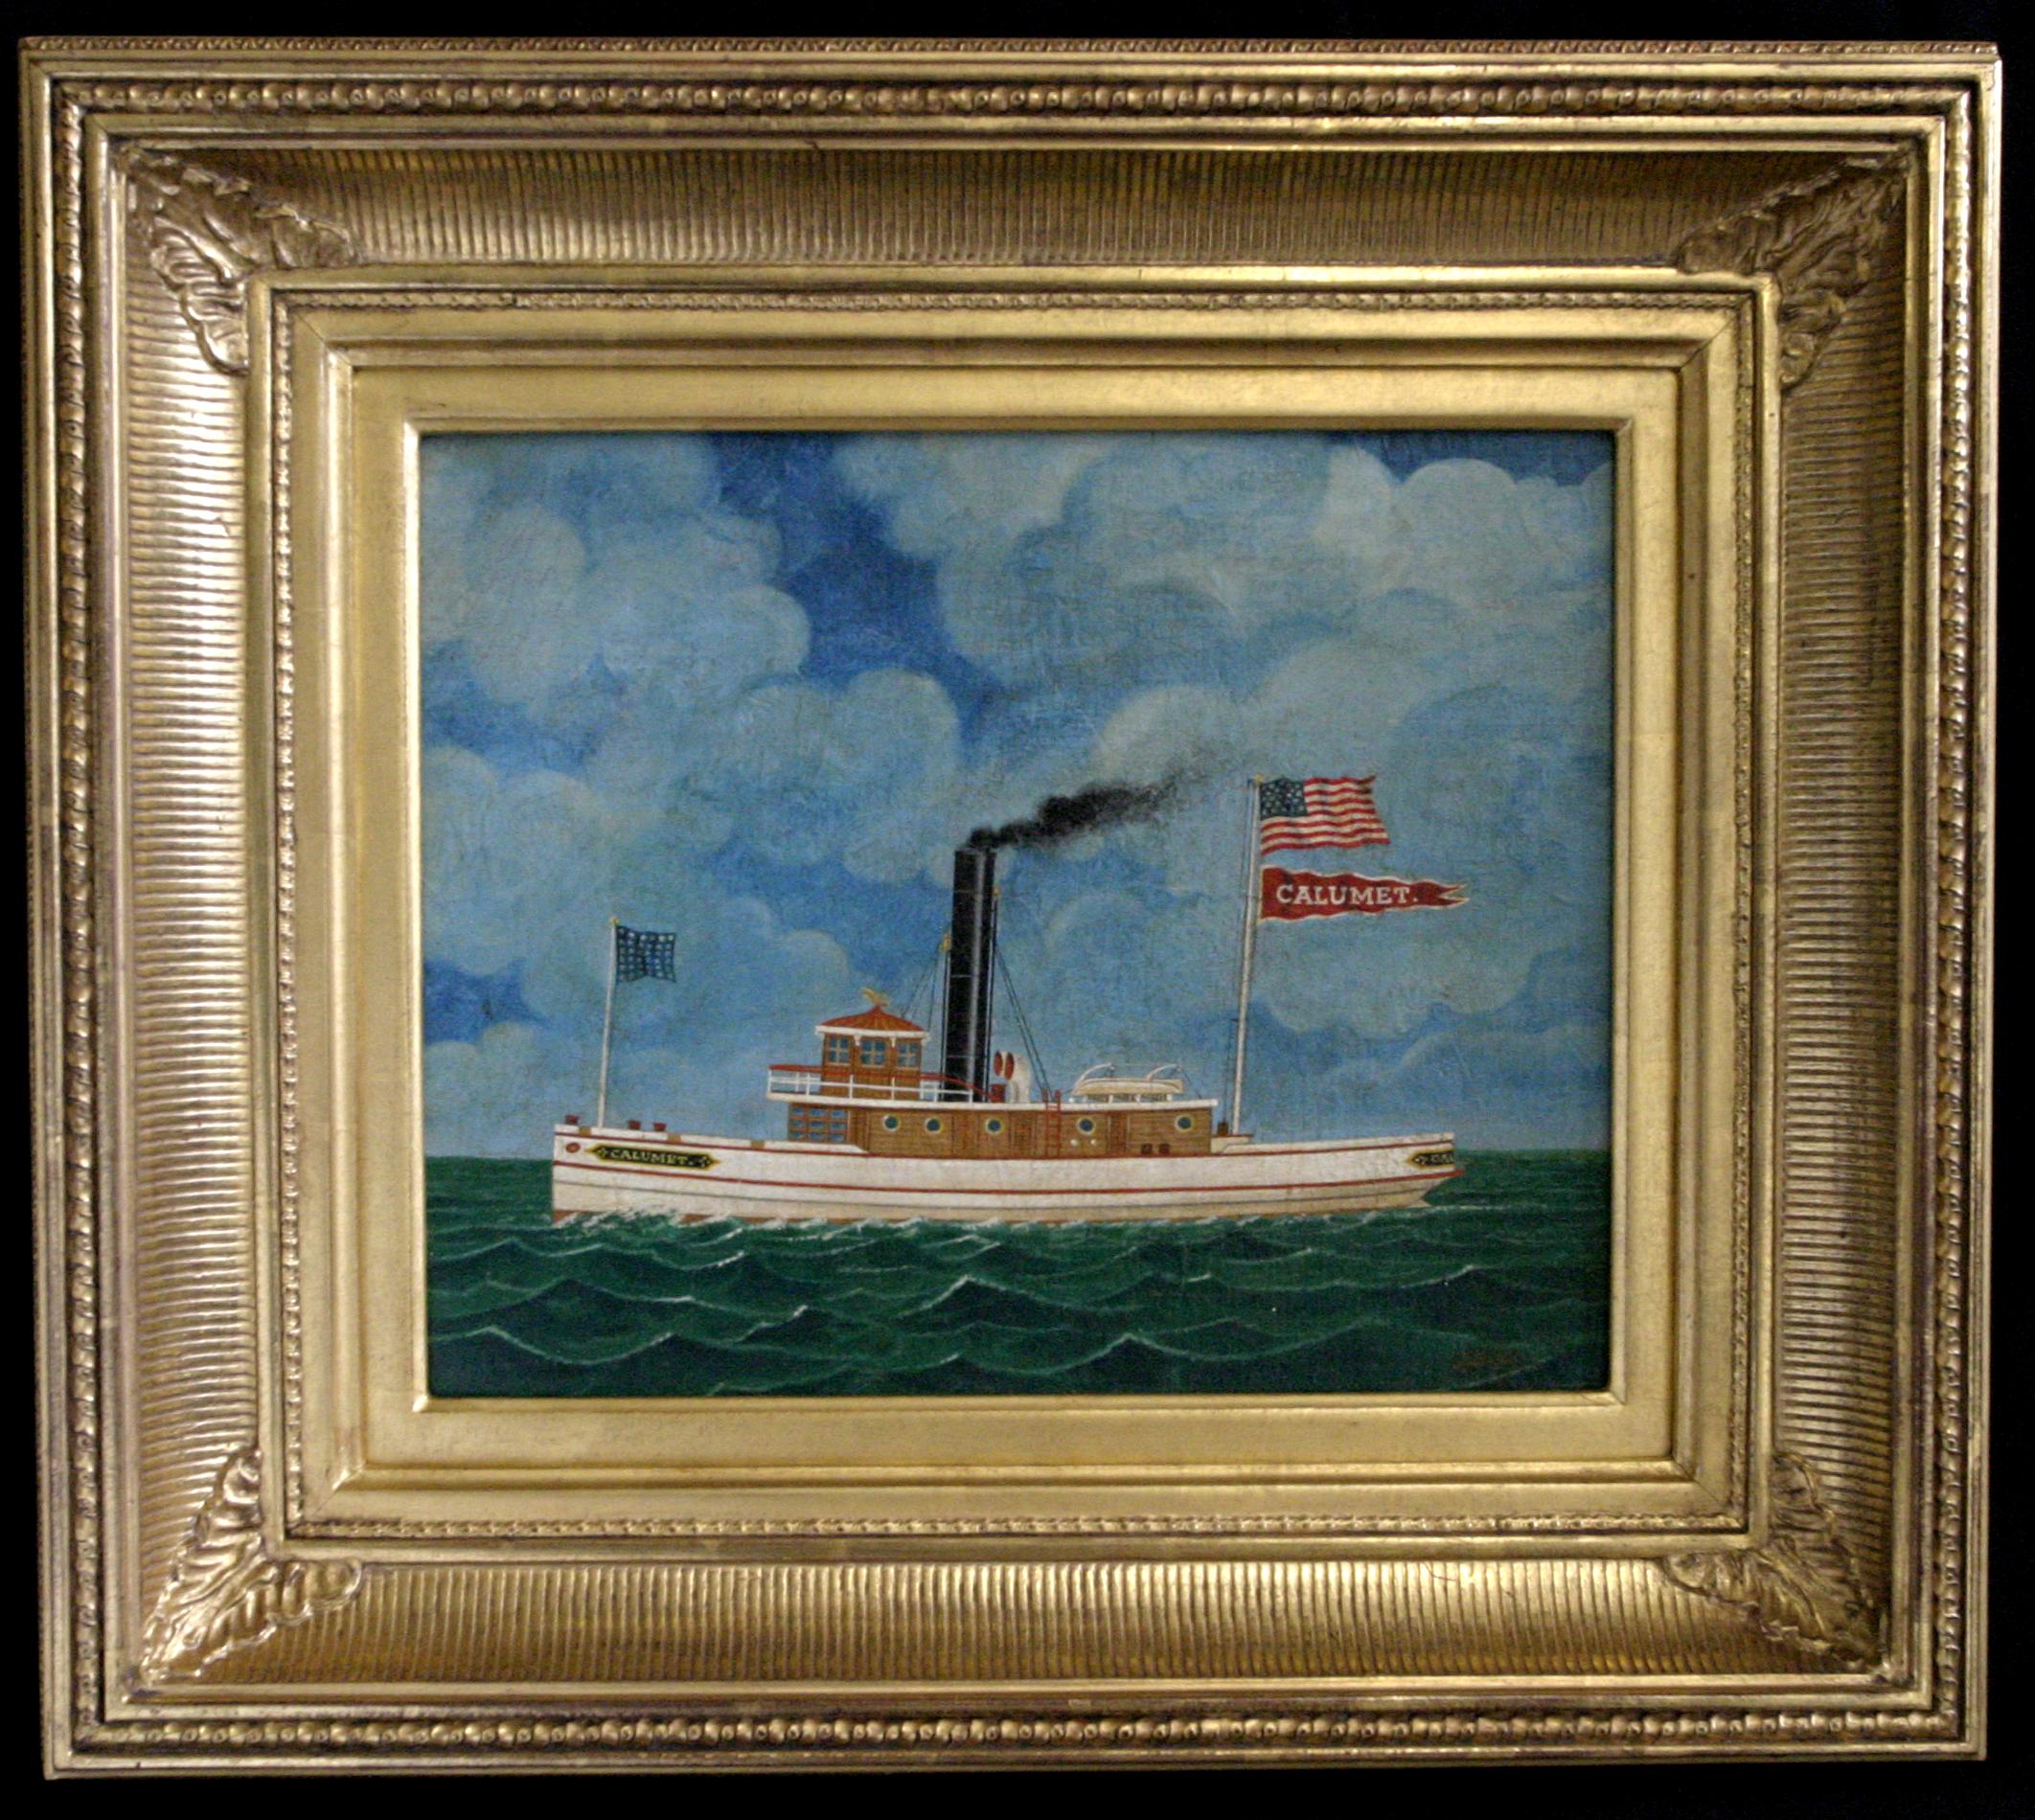 Great Lakes Tugboat CALUMET - Painting by Otto Muhlenfeld